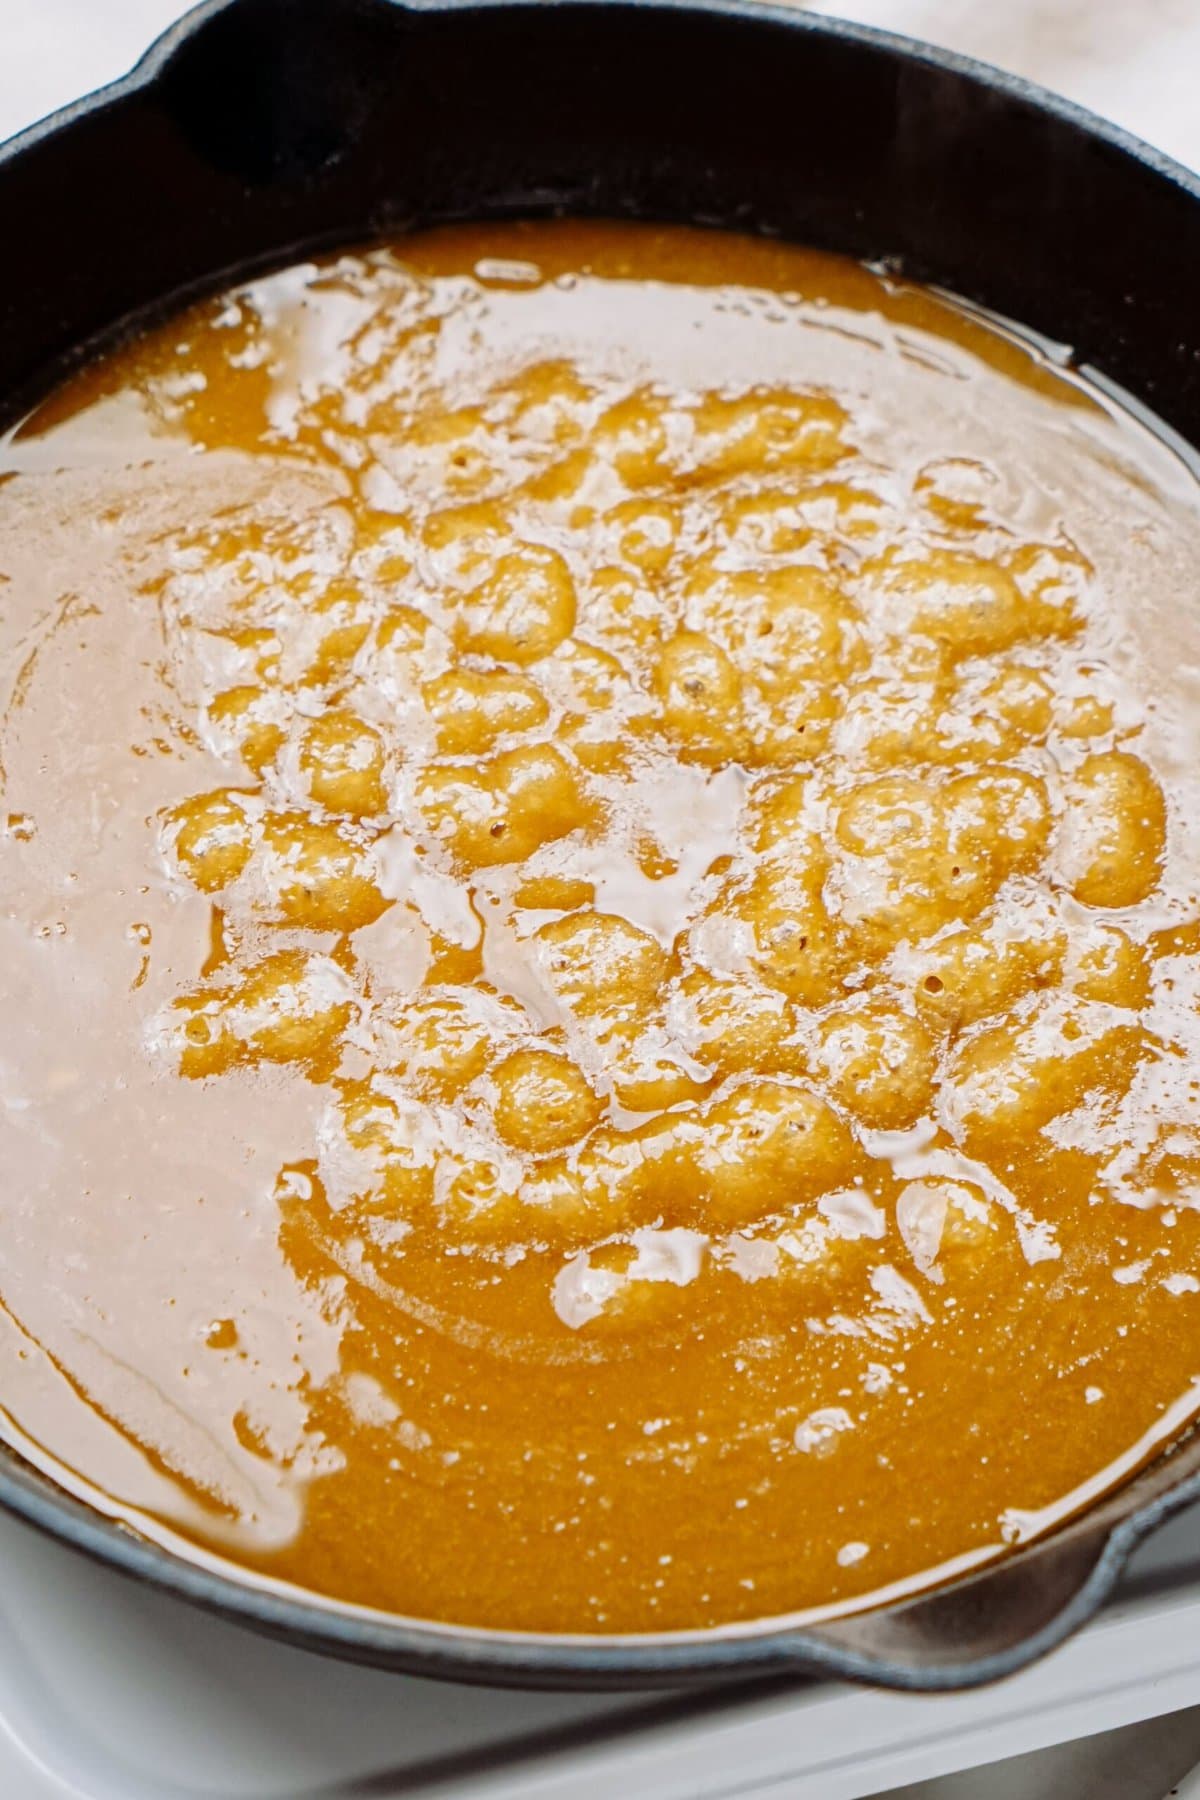 A skillet containing simmering sauce with bubbles forming on the surface.